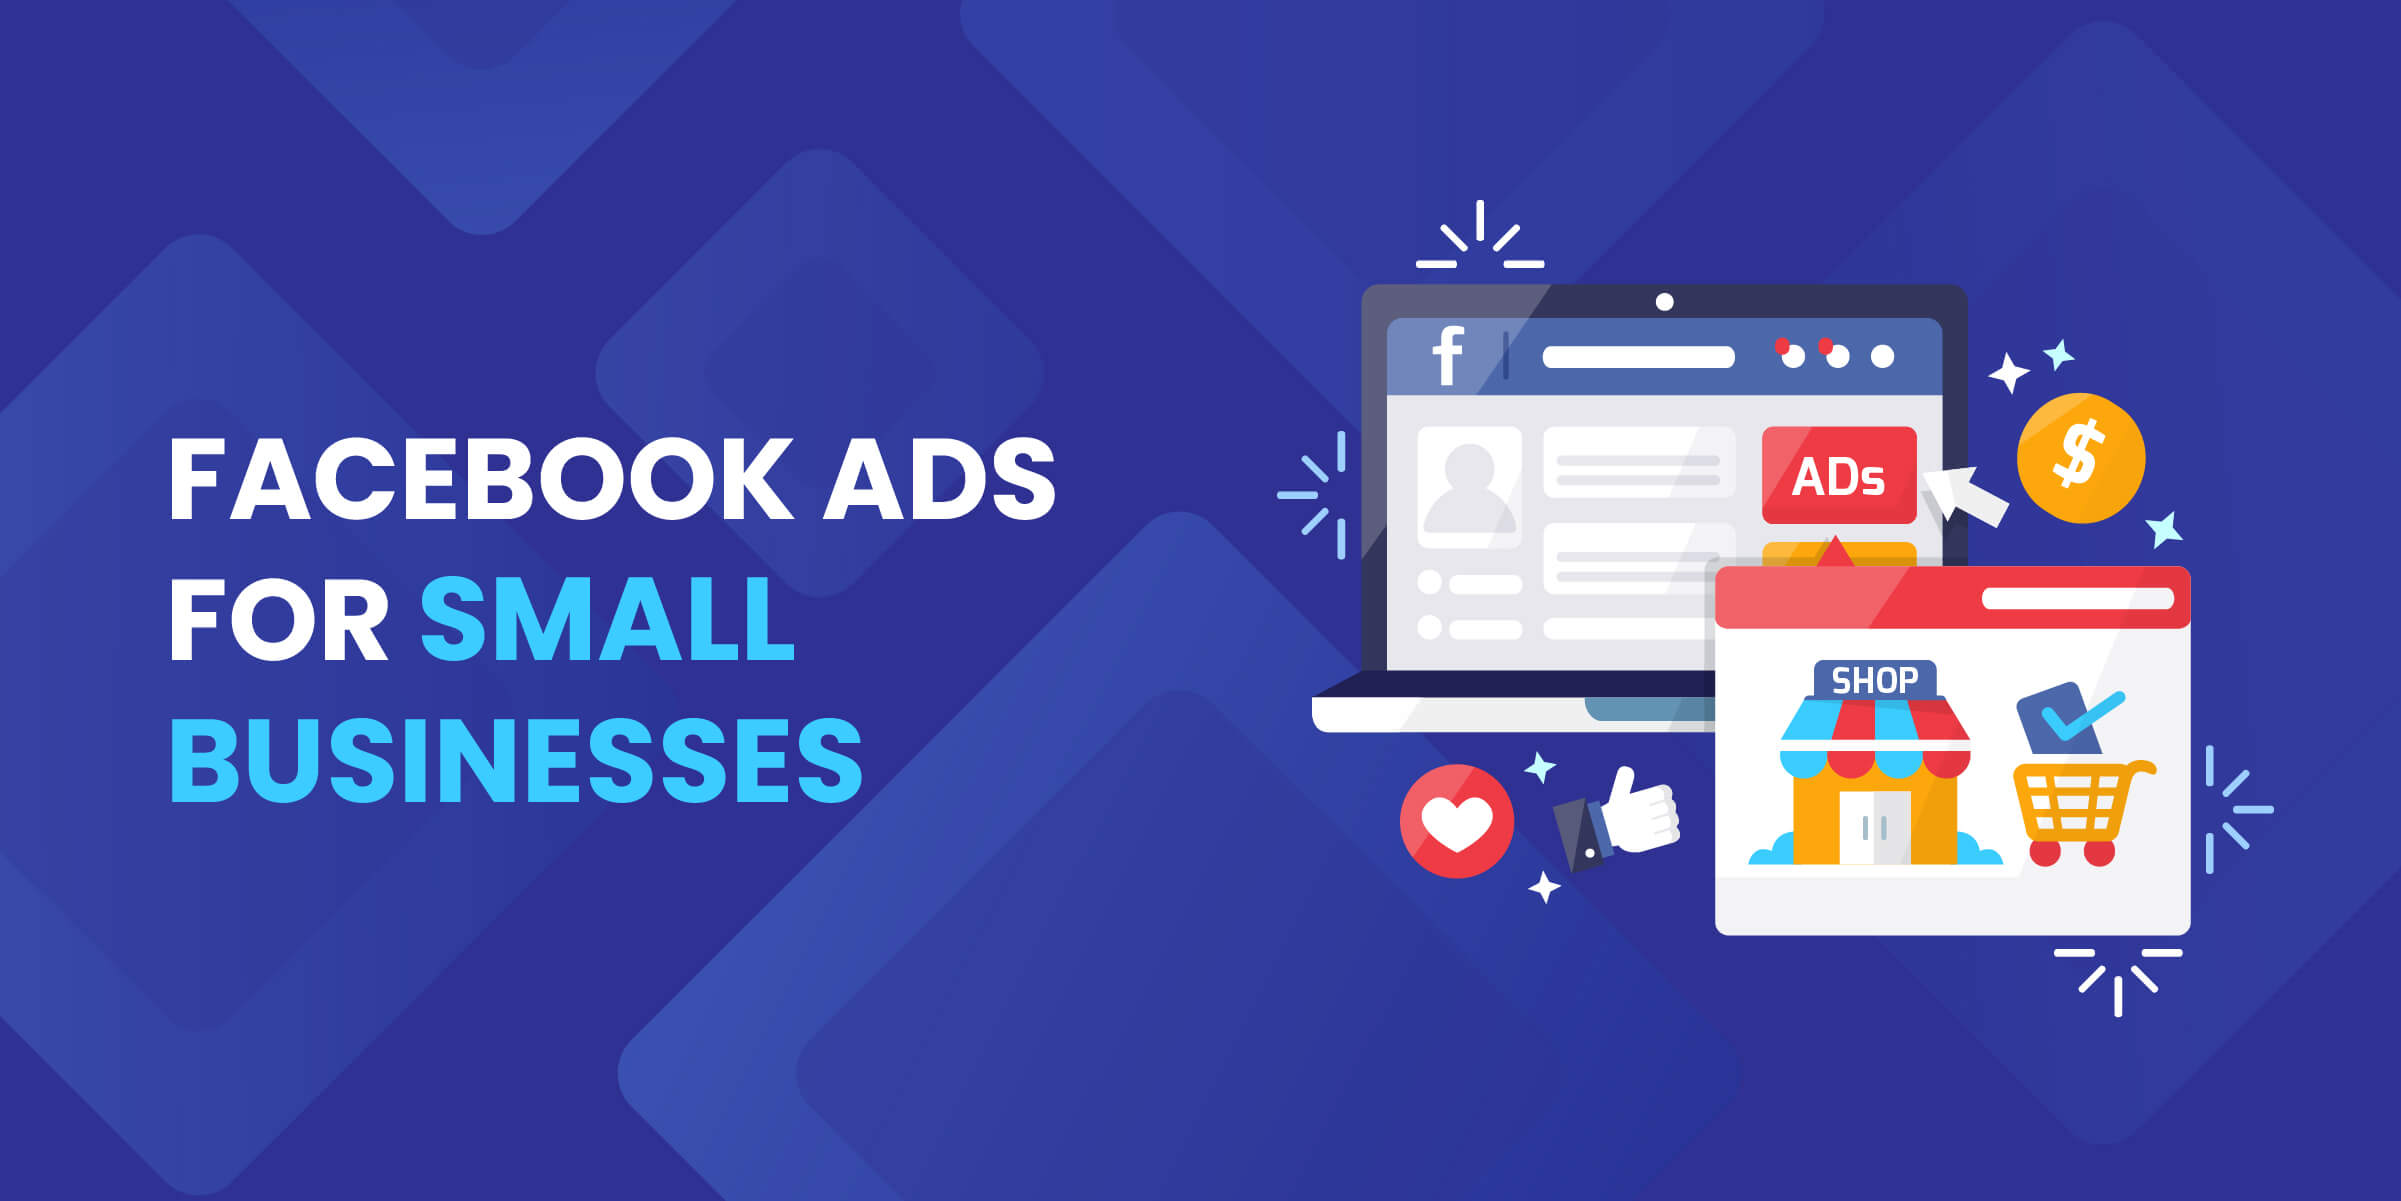 Facebook Ads for Small Business